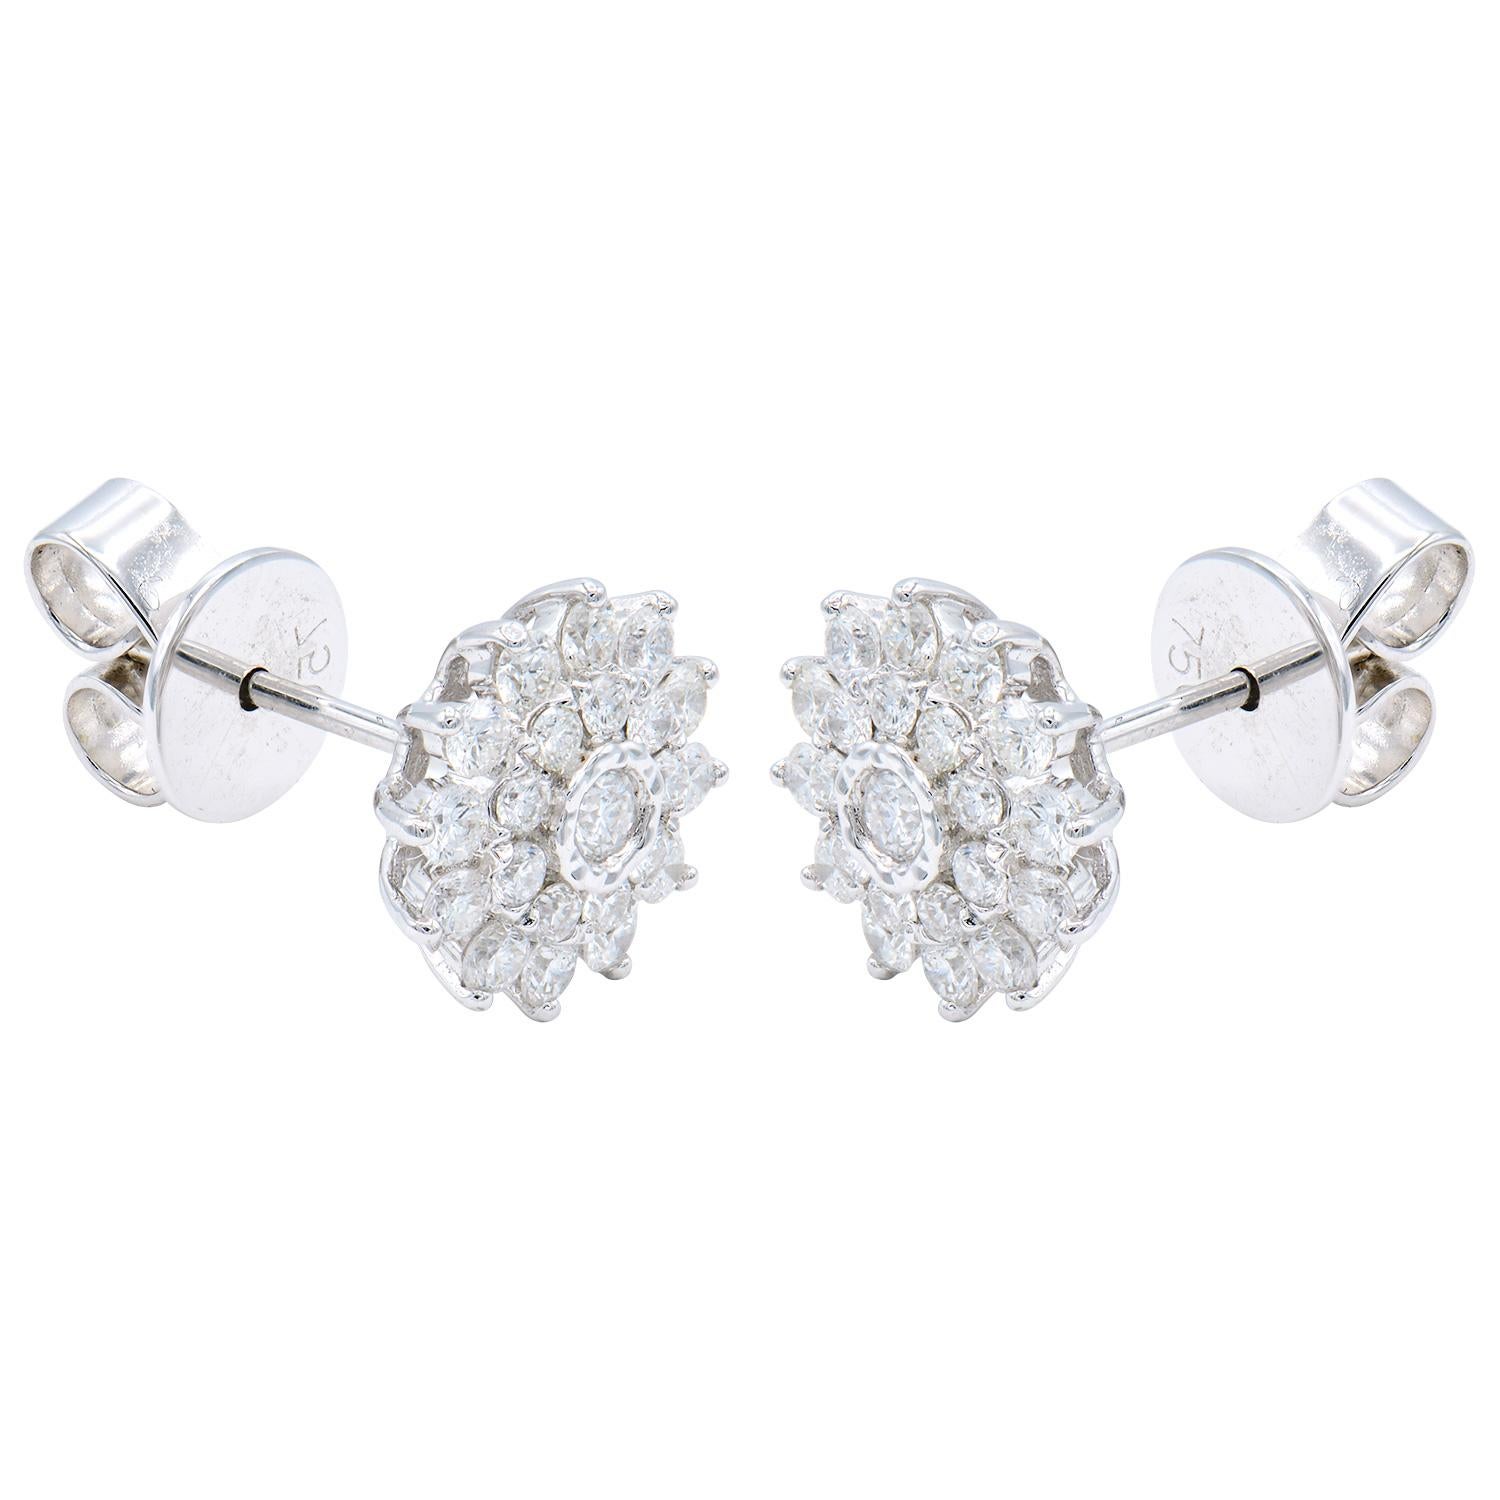 These beautiful diamond earrings are definitely for someone special. They are made out of 2.6 grams of 18 karat white gold which is set with 44 round VS2, G color diamonds totaling 0.66 carats to complete this stunning shape. The earrings are